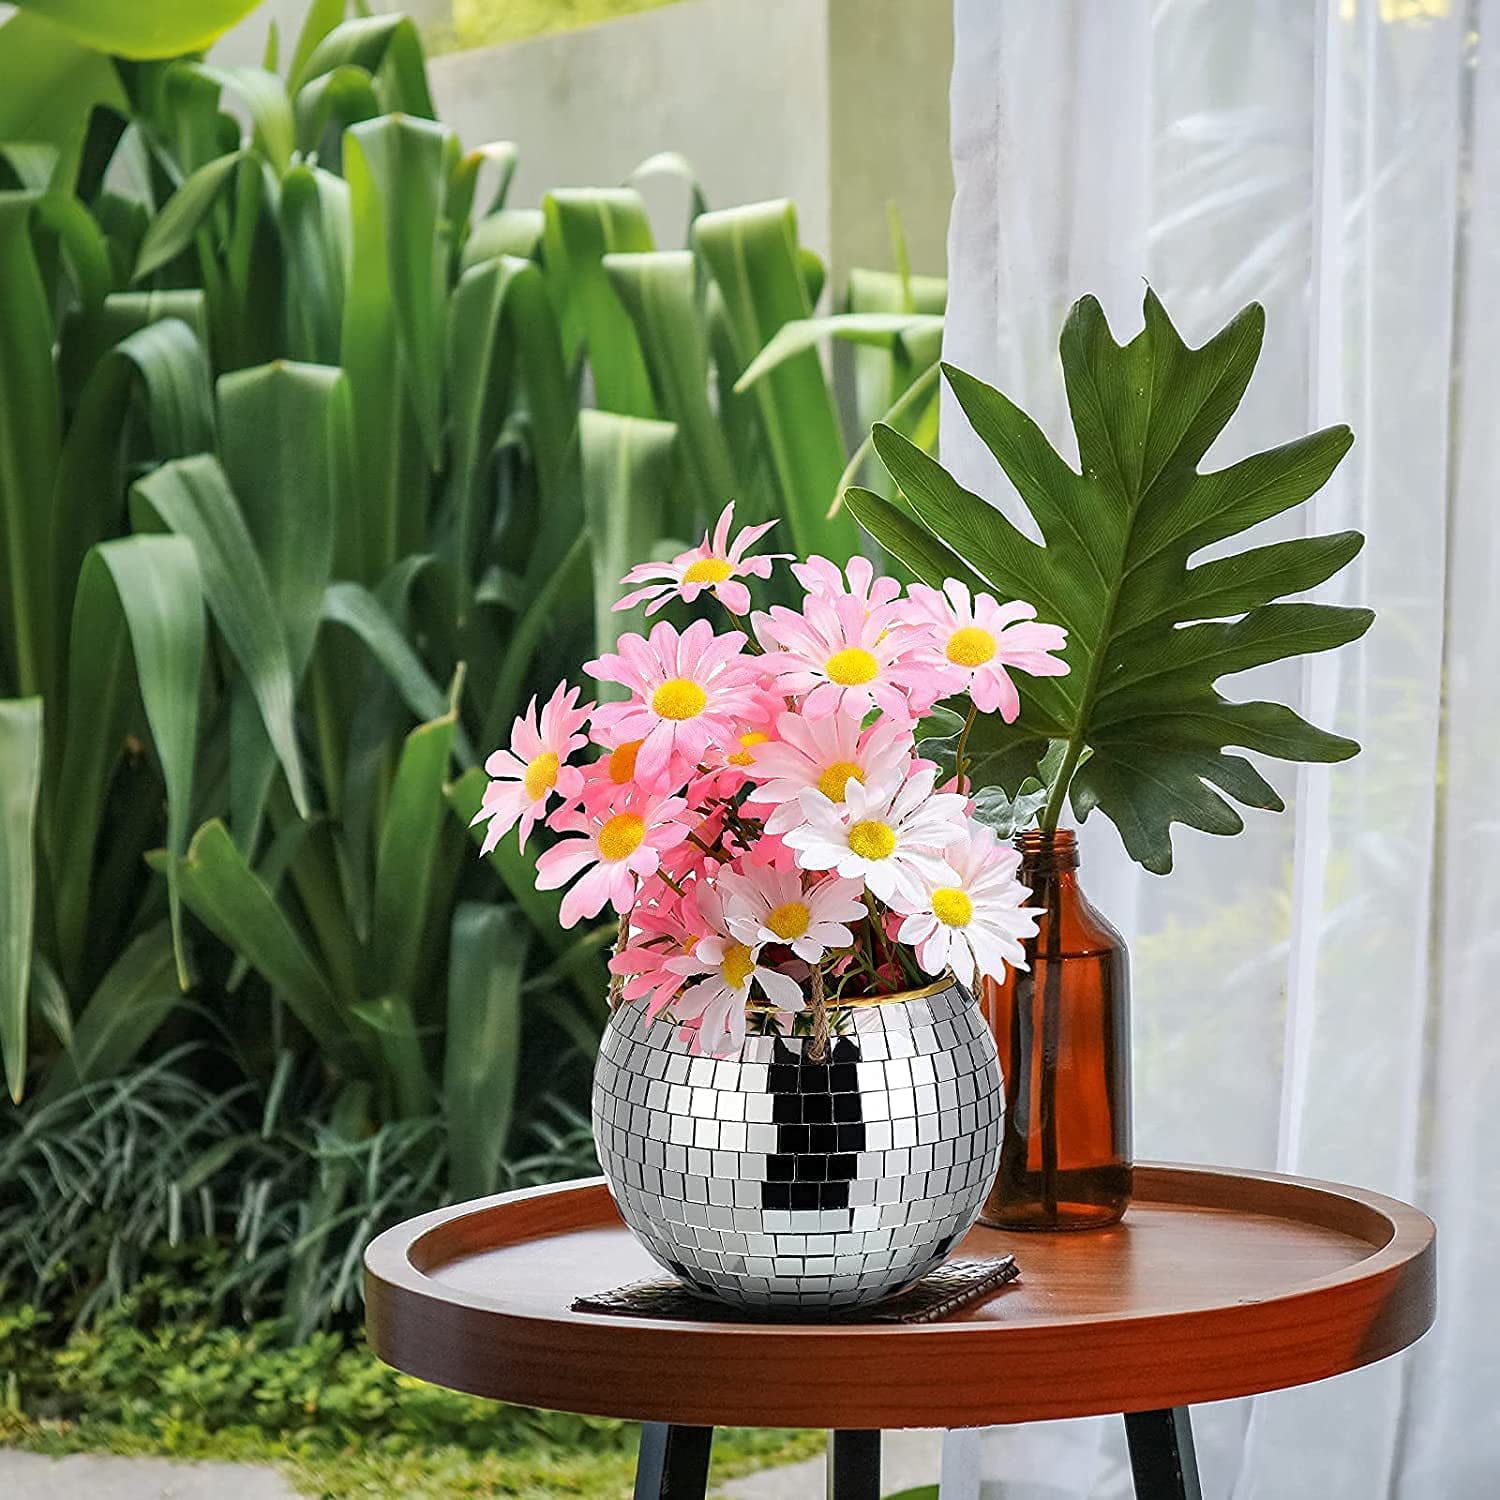 Disco Ball Planter, Hanging Macrame Rope Ball Planter Pot With Drainage  Hole For Plant Care, Indoor Or Outdoor Use For Room Office Patio Pot Decor  – Walmart With Ball Plant Stands (View 5 of 15)